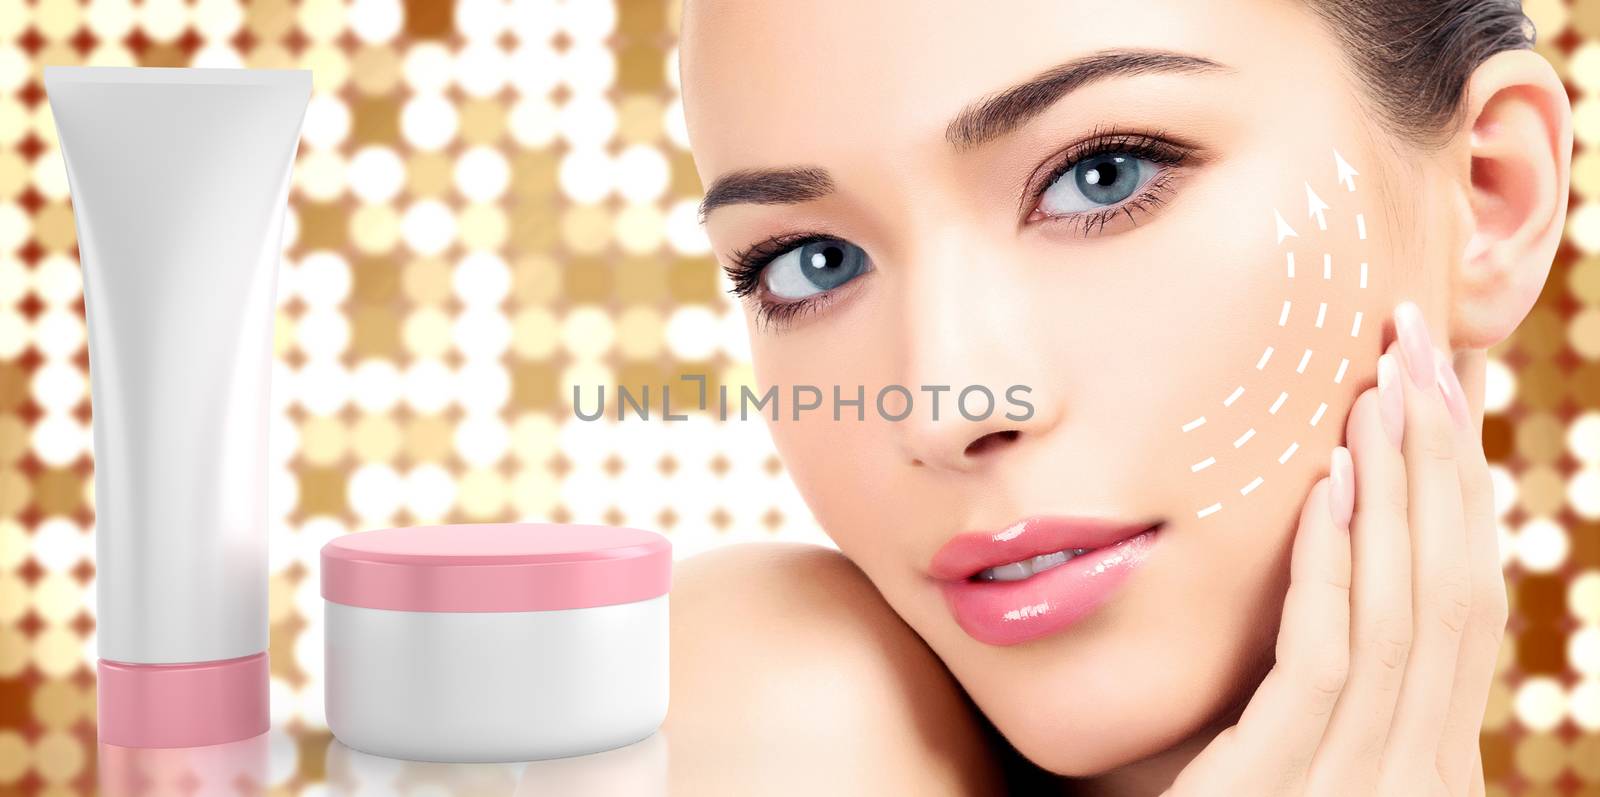 Woman beauty face and cosmetics tube and jar on an abstract background